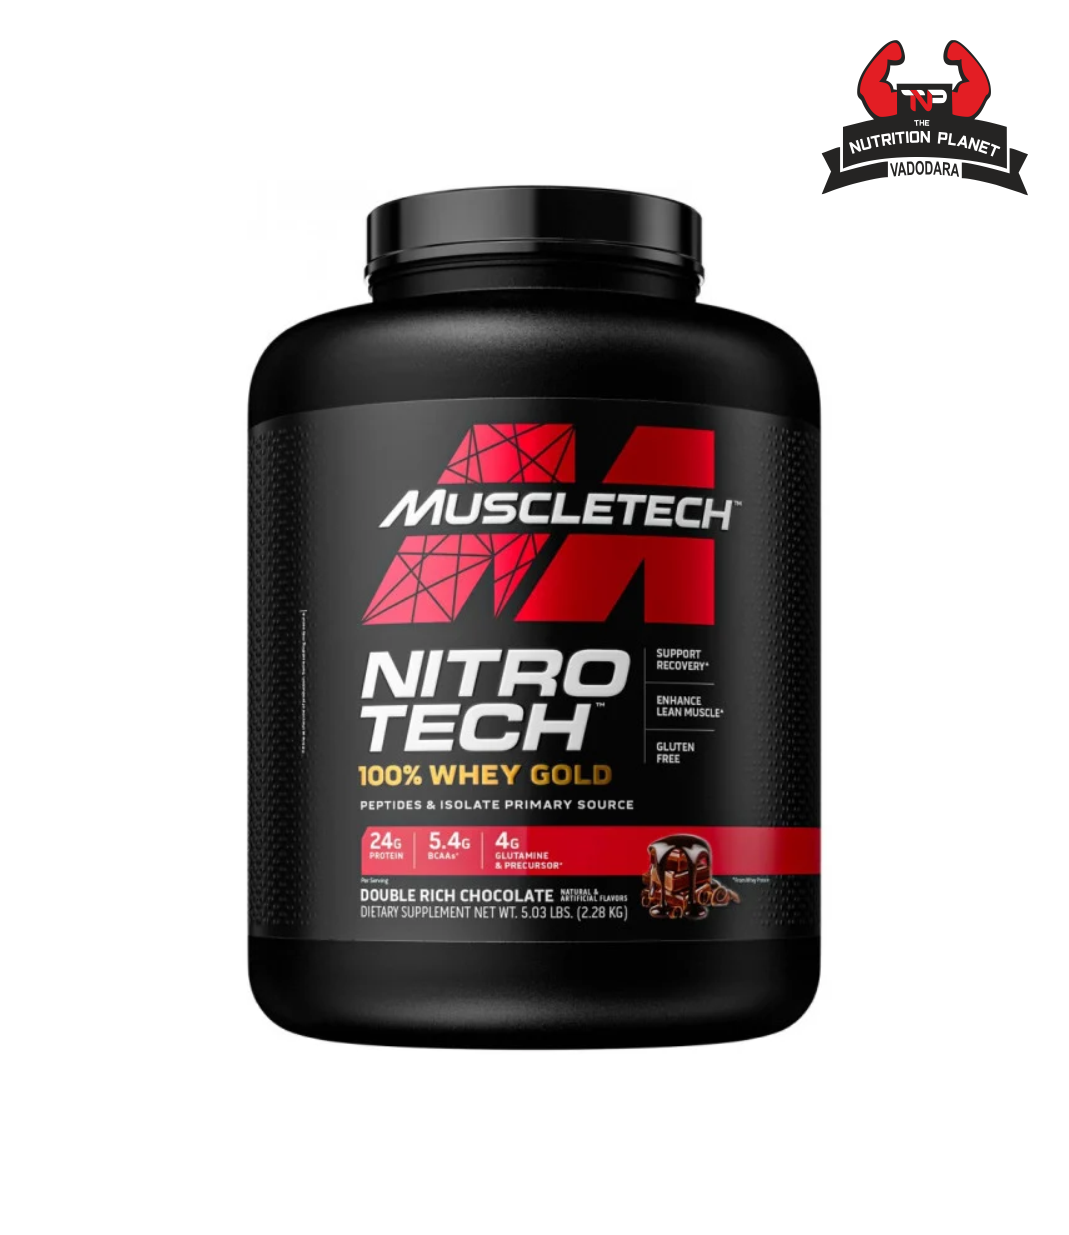 MuscleTech Nitrotech 100% Whey Gold with official authentic tag